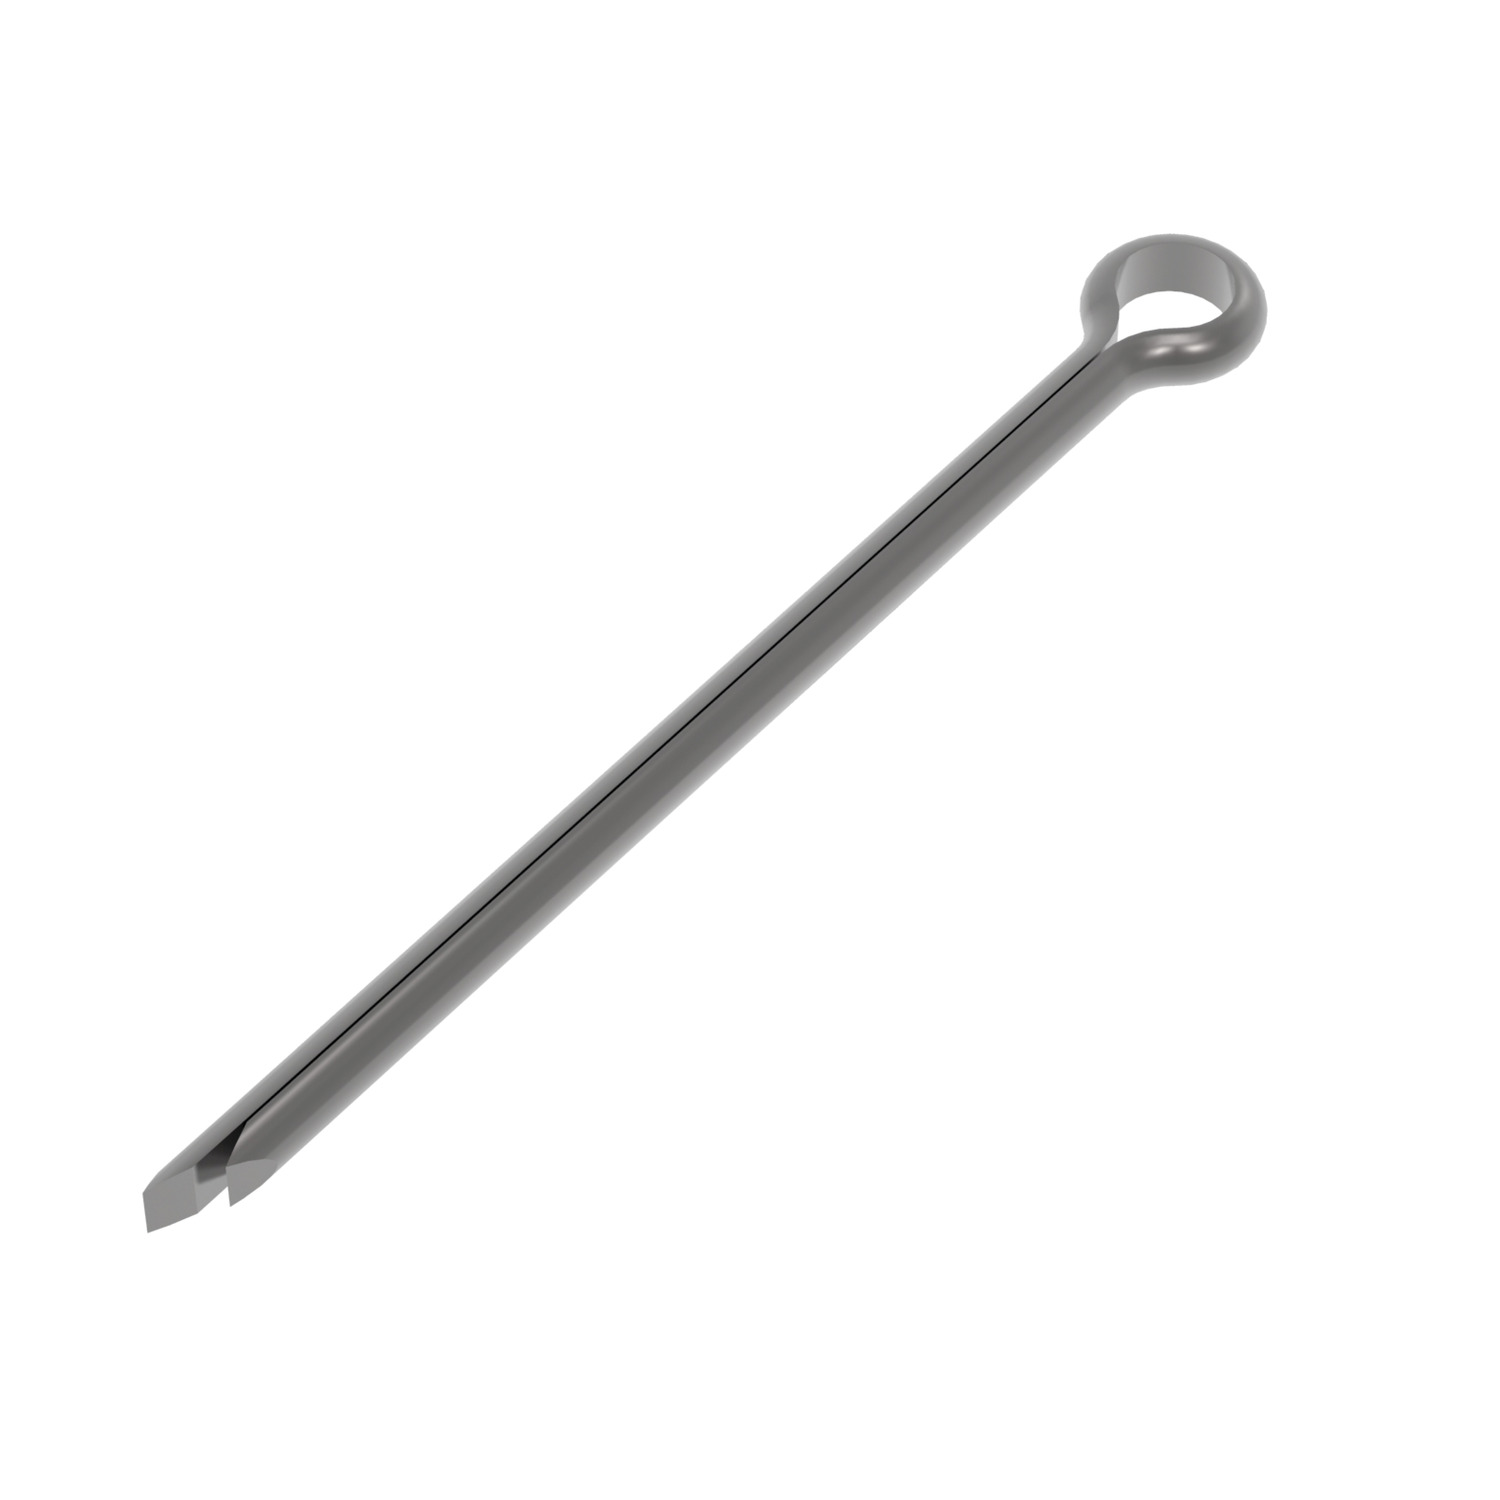 Steel Cotter Pins Cotter & Clevis pins are manufactured to DIN 94.